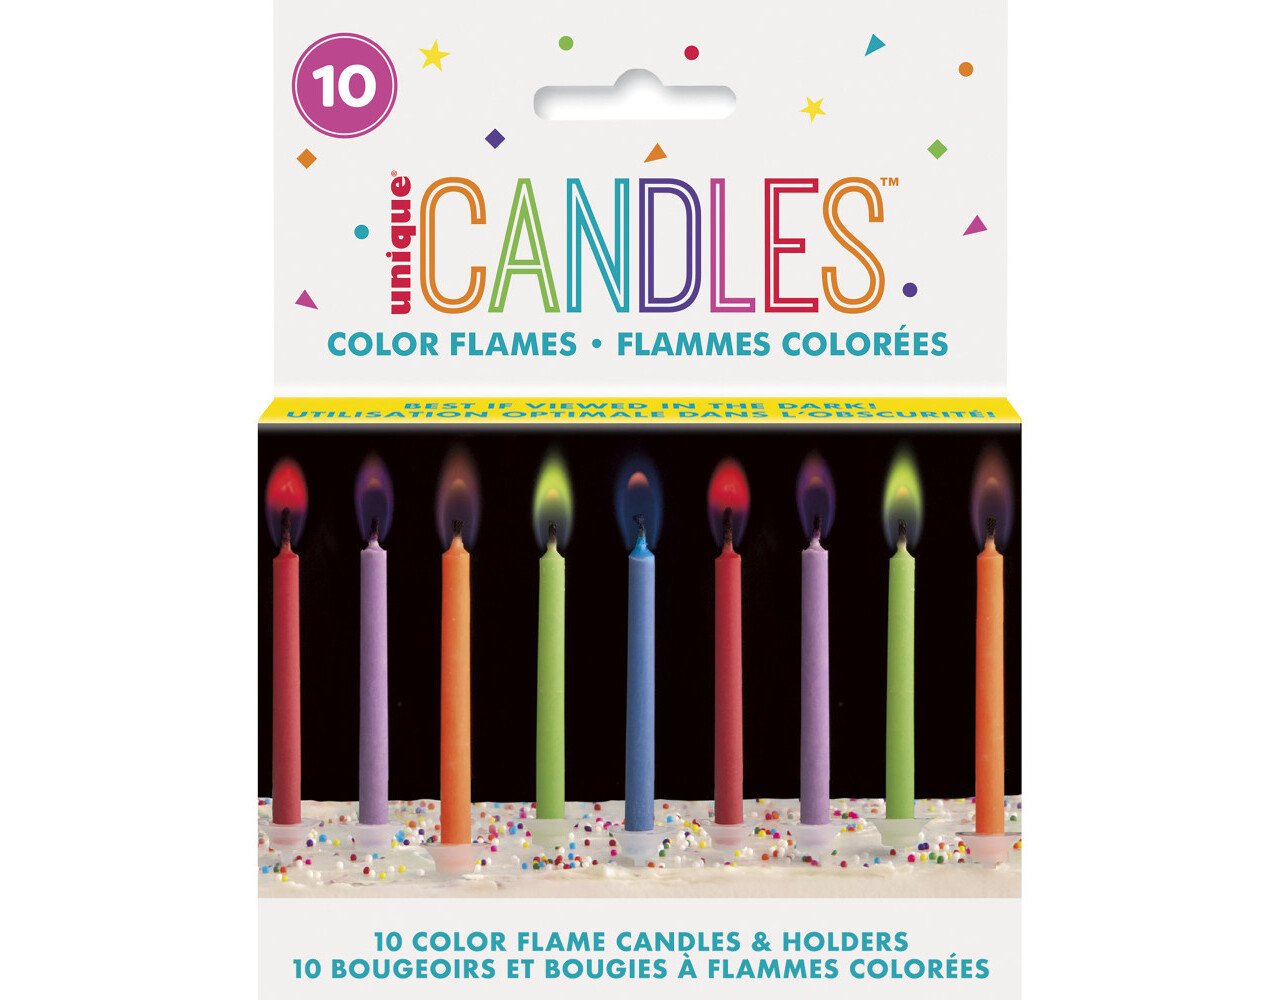 PartyDeco Candele Compleanno Fiamme Colorate 6pz - Fantaparty.it